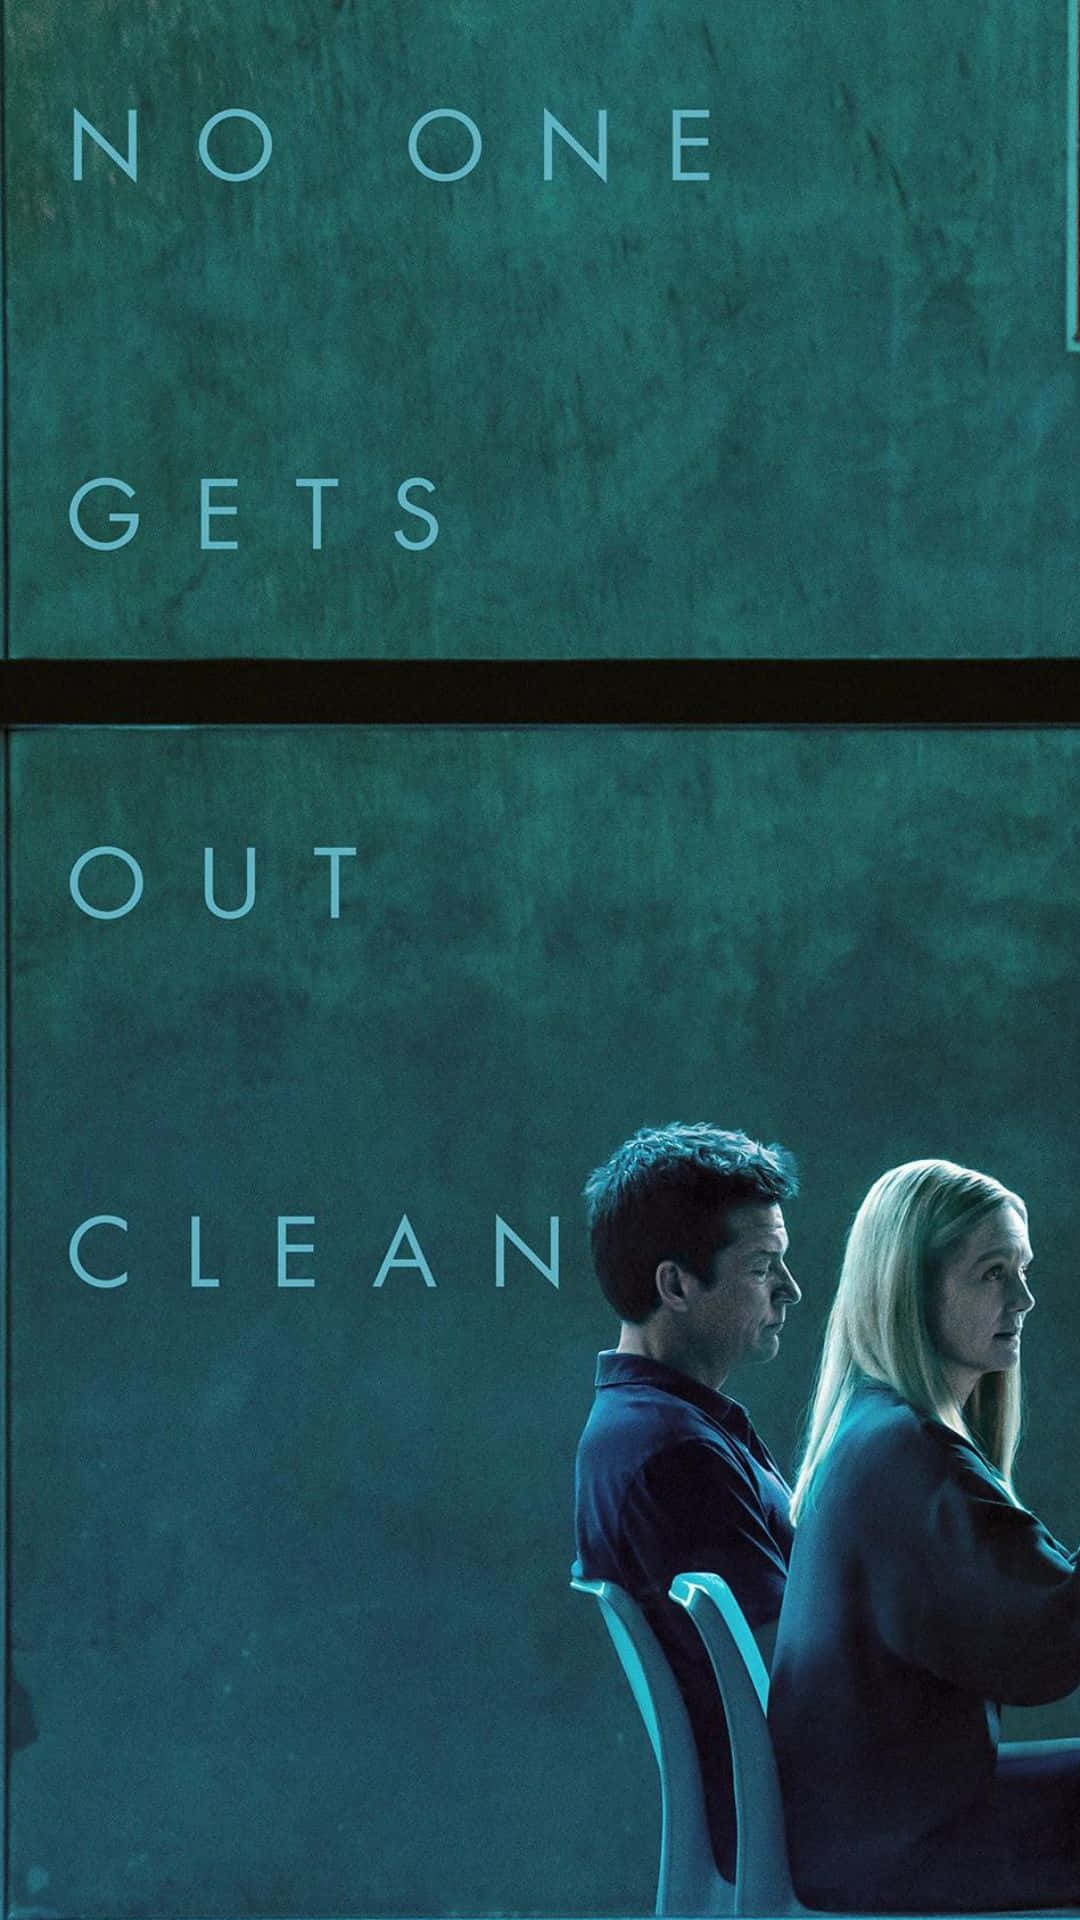 Ozark No One Gets Out Clean Poster Wallpaper